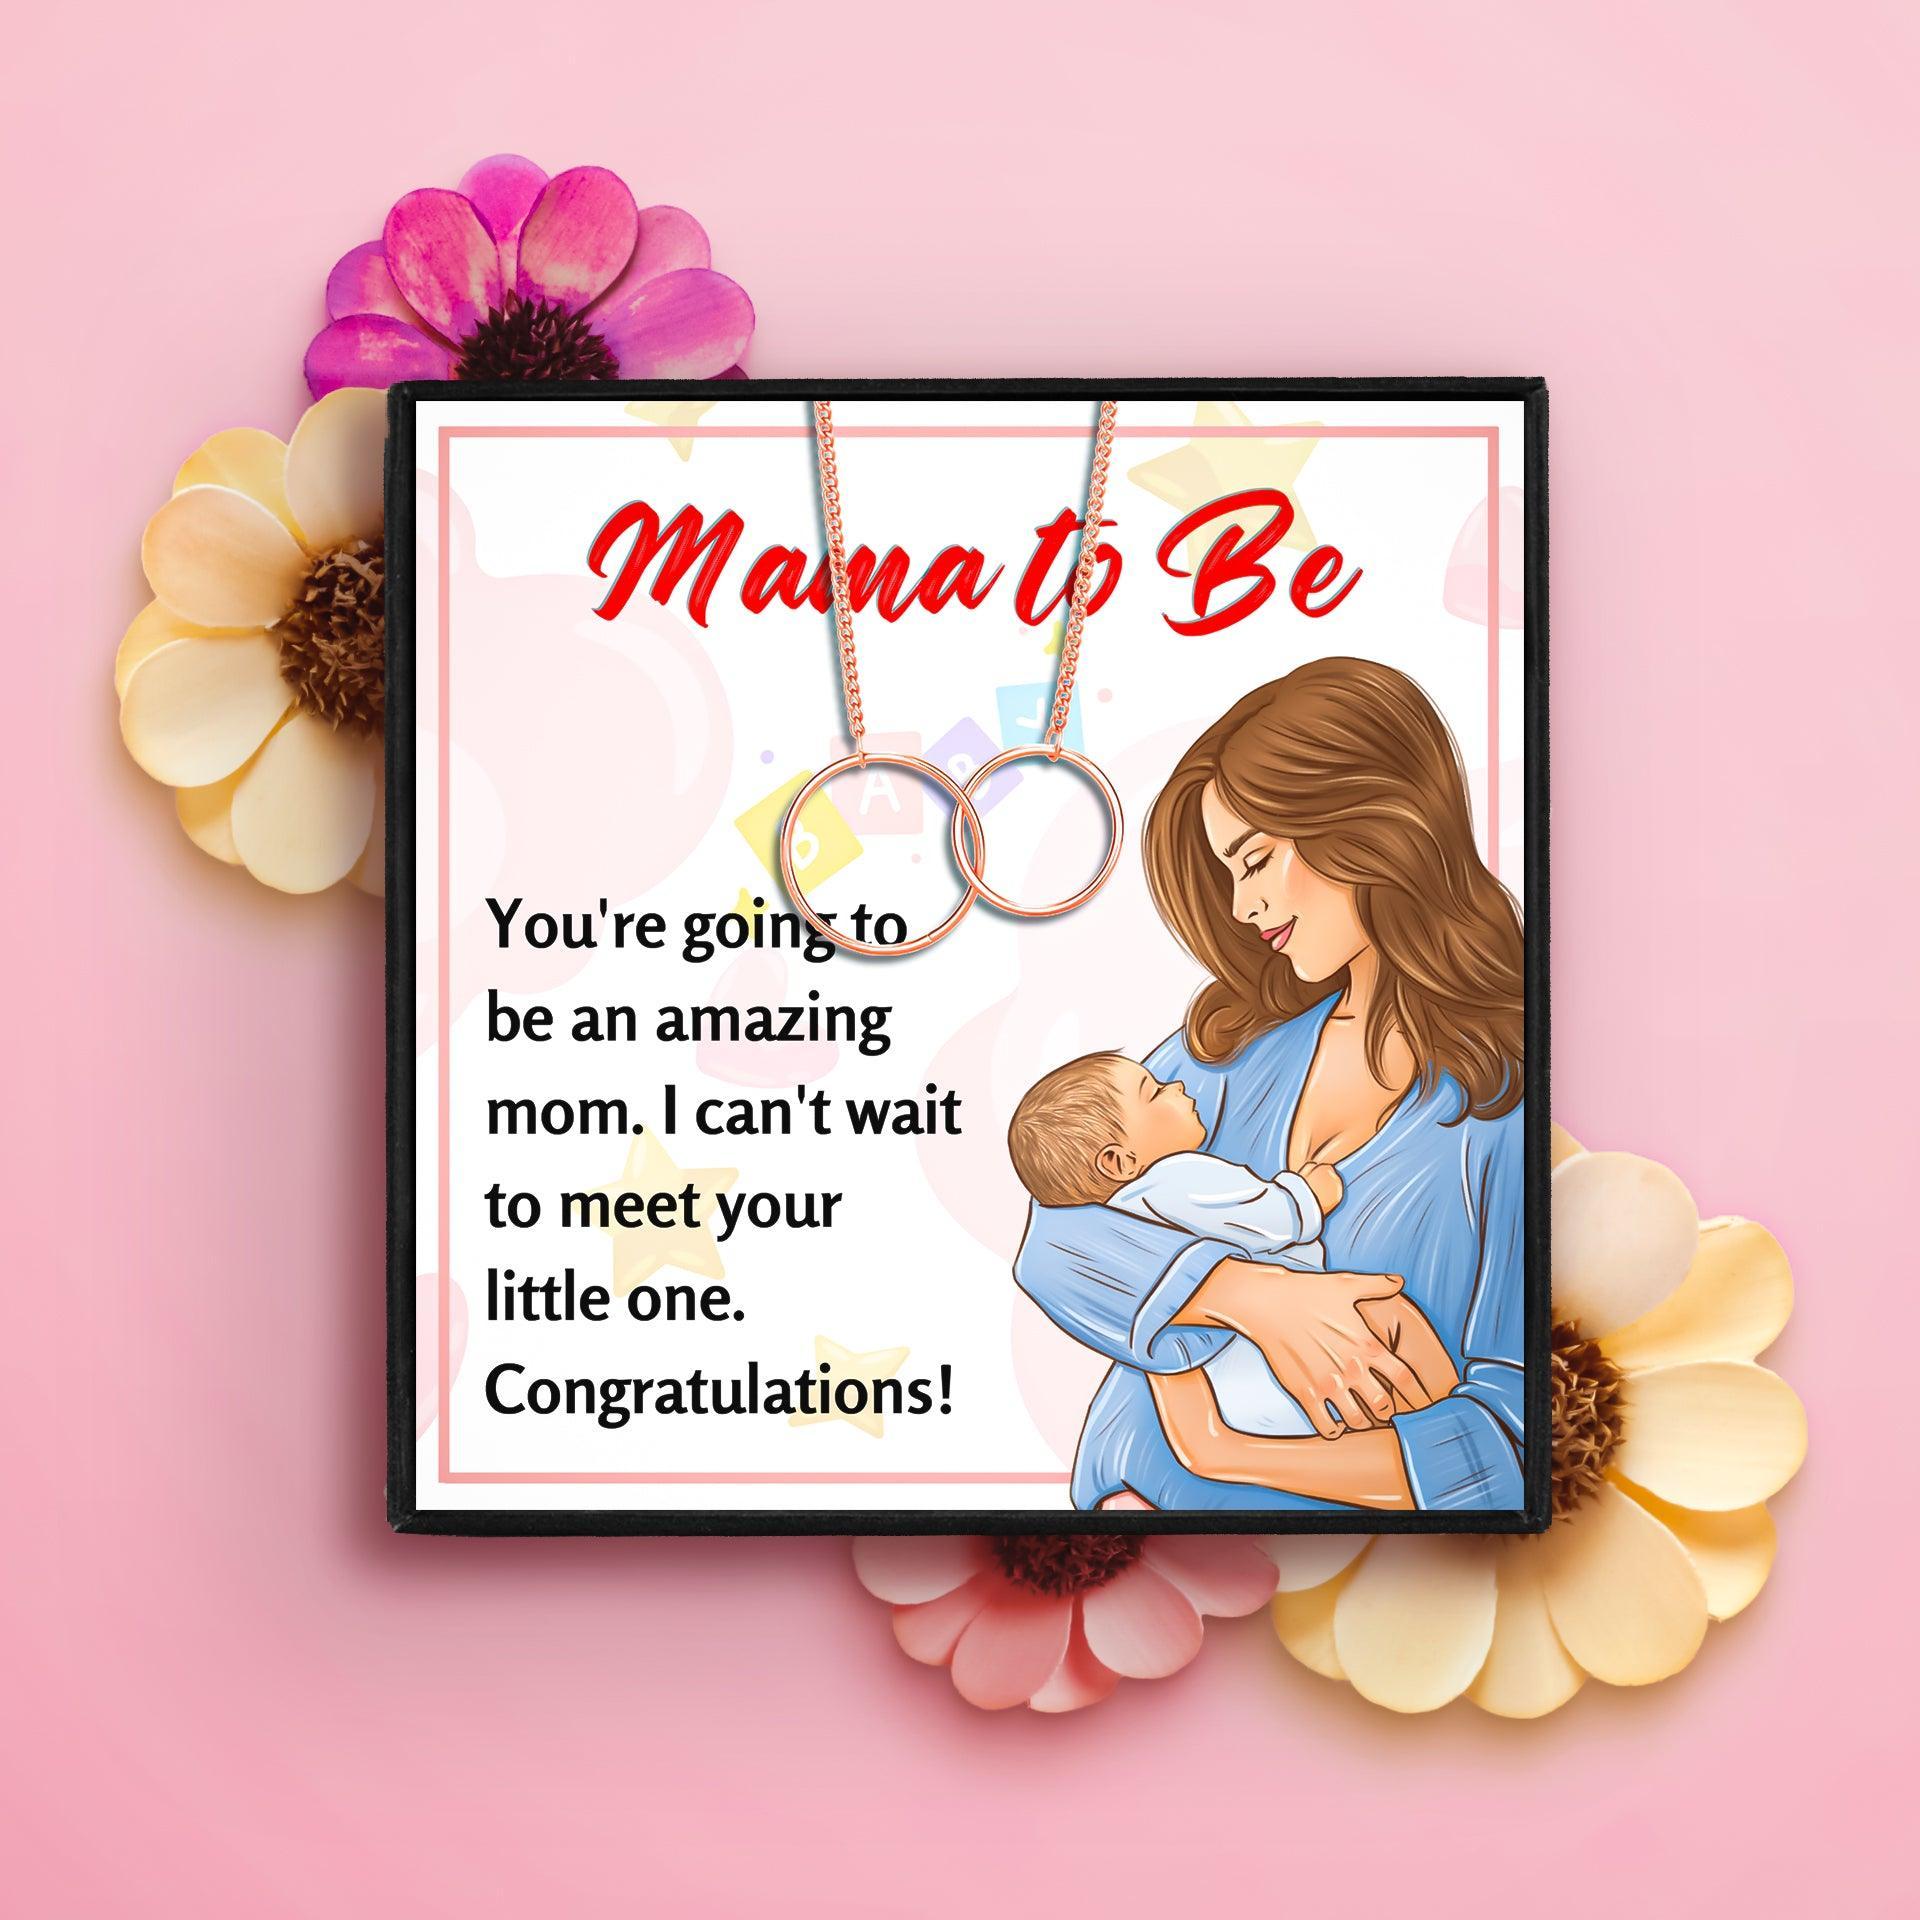 Meaningful Presents For Pregnant Women for Christmas 2023 | Meaningful Presents For Pregnant Women - undefined | Gifts for Pregnant Women, mama to be necklace, mom to be necklace, Mommy To Be Necklace, New Mom Jewelry | From Hunny Life | hunnylife.com